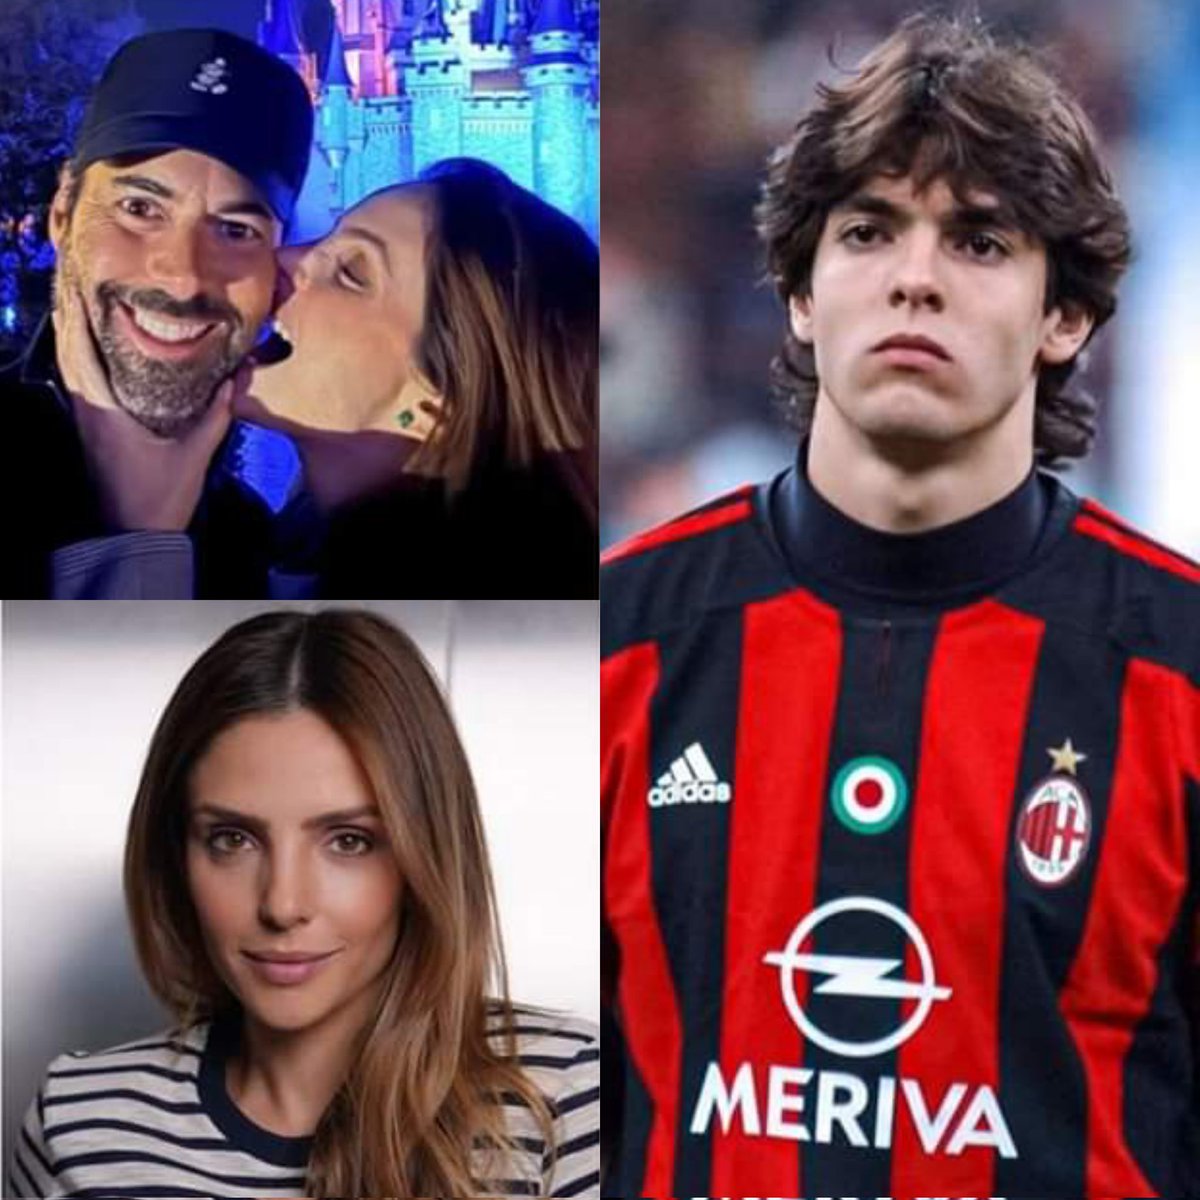 Kaka's ex wife reveals the reason she divorced him was because he was a perfect husband. In her own words 'Kaka never betrayed me, he always treated me well, he gave me a wonderful family, but I was not happy, something was missing. The problem was that, he was too perfect for…